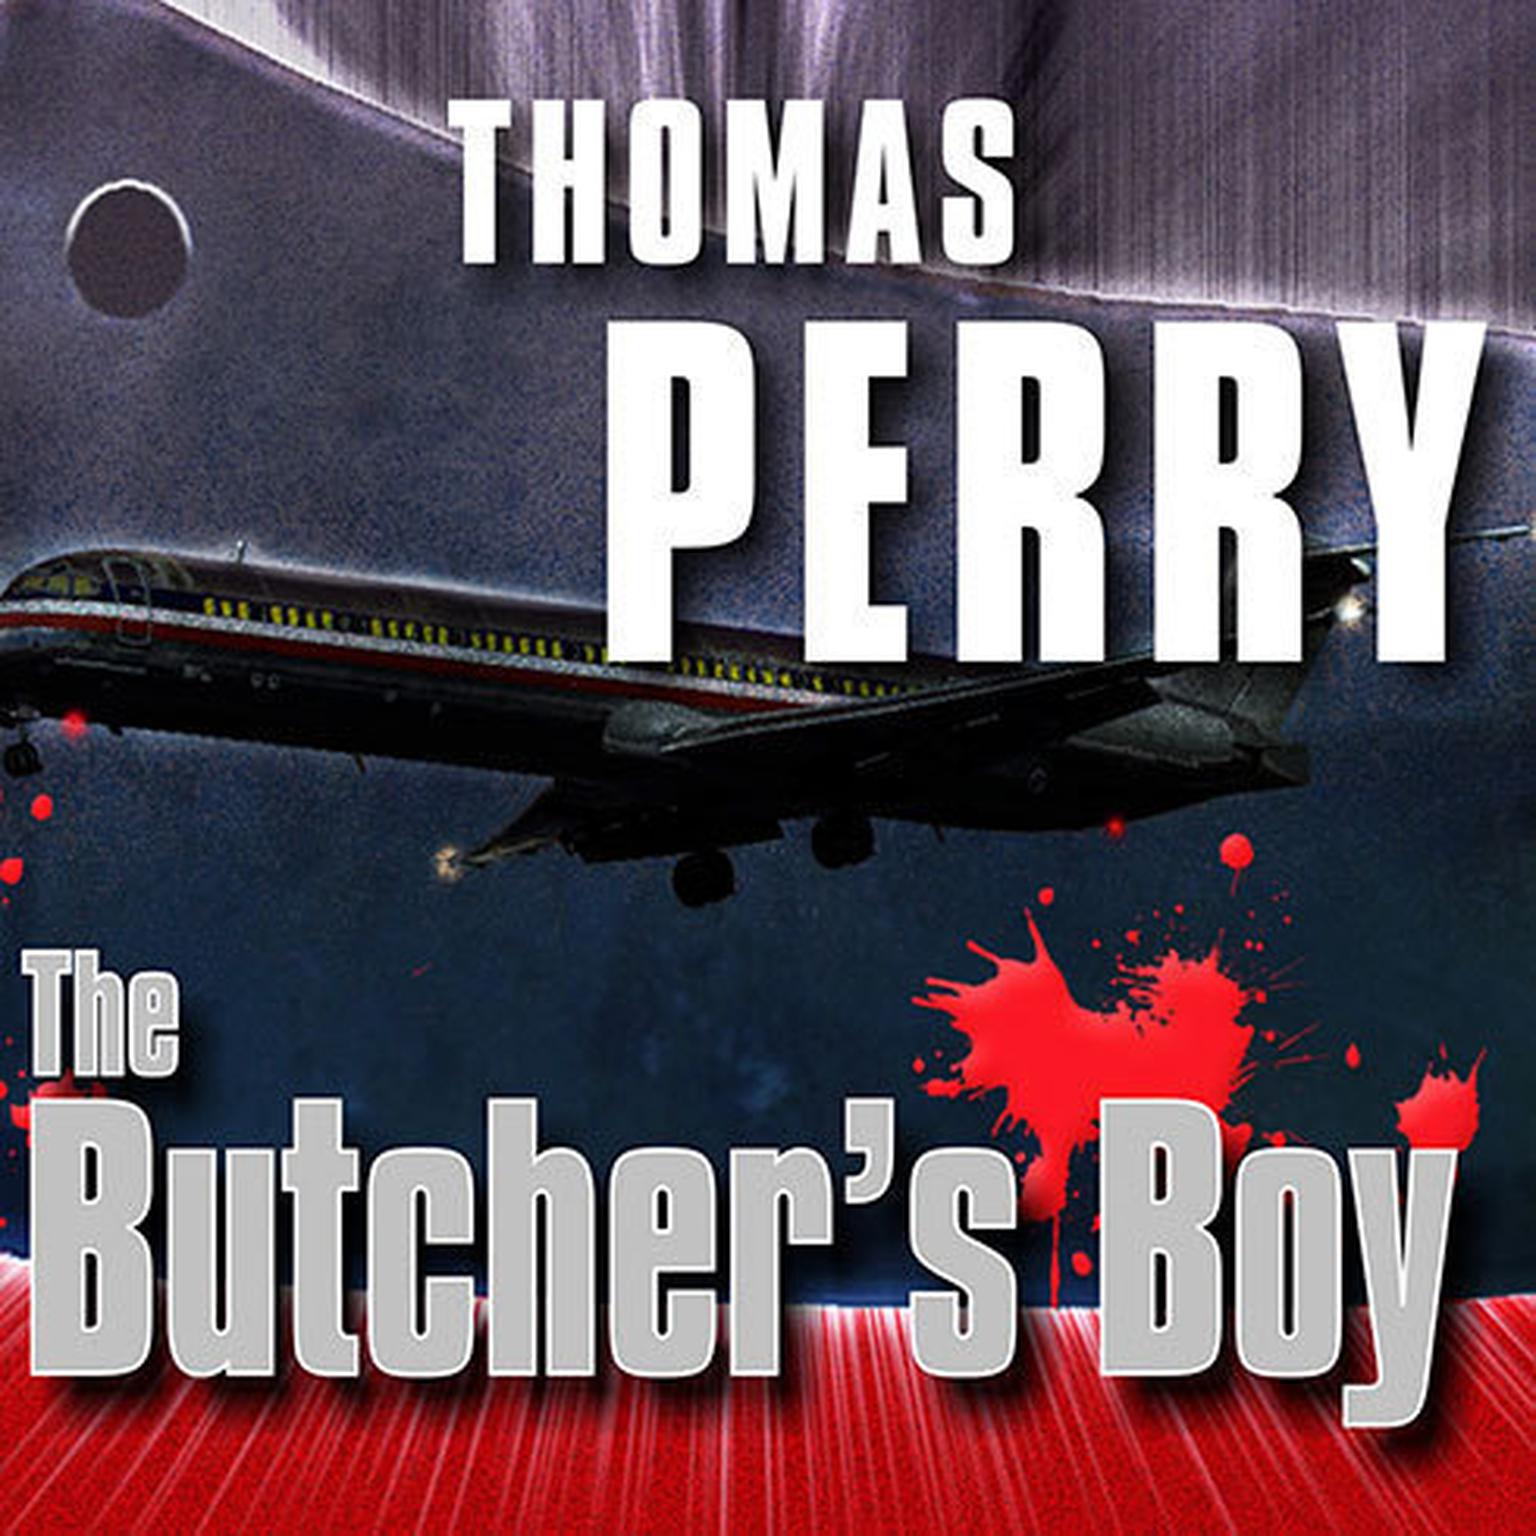 The Butchers Boy Audiobook, by Thomas Perry